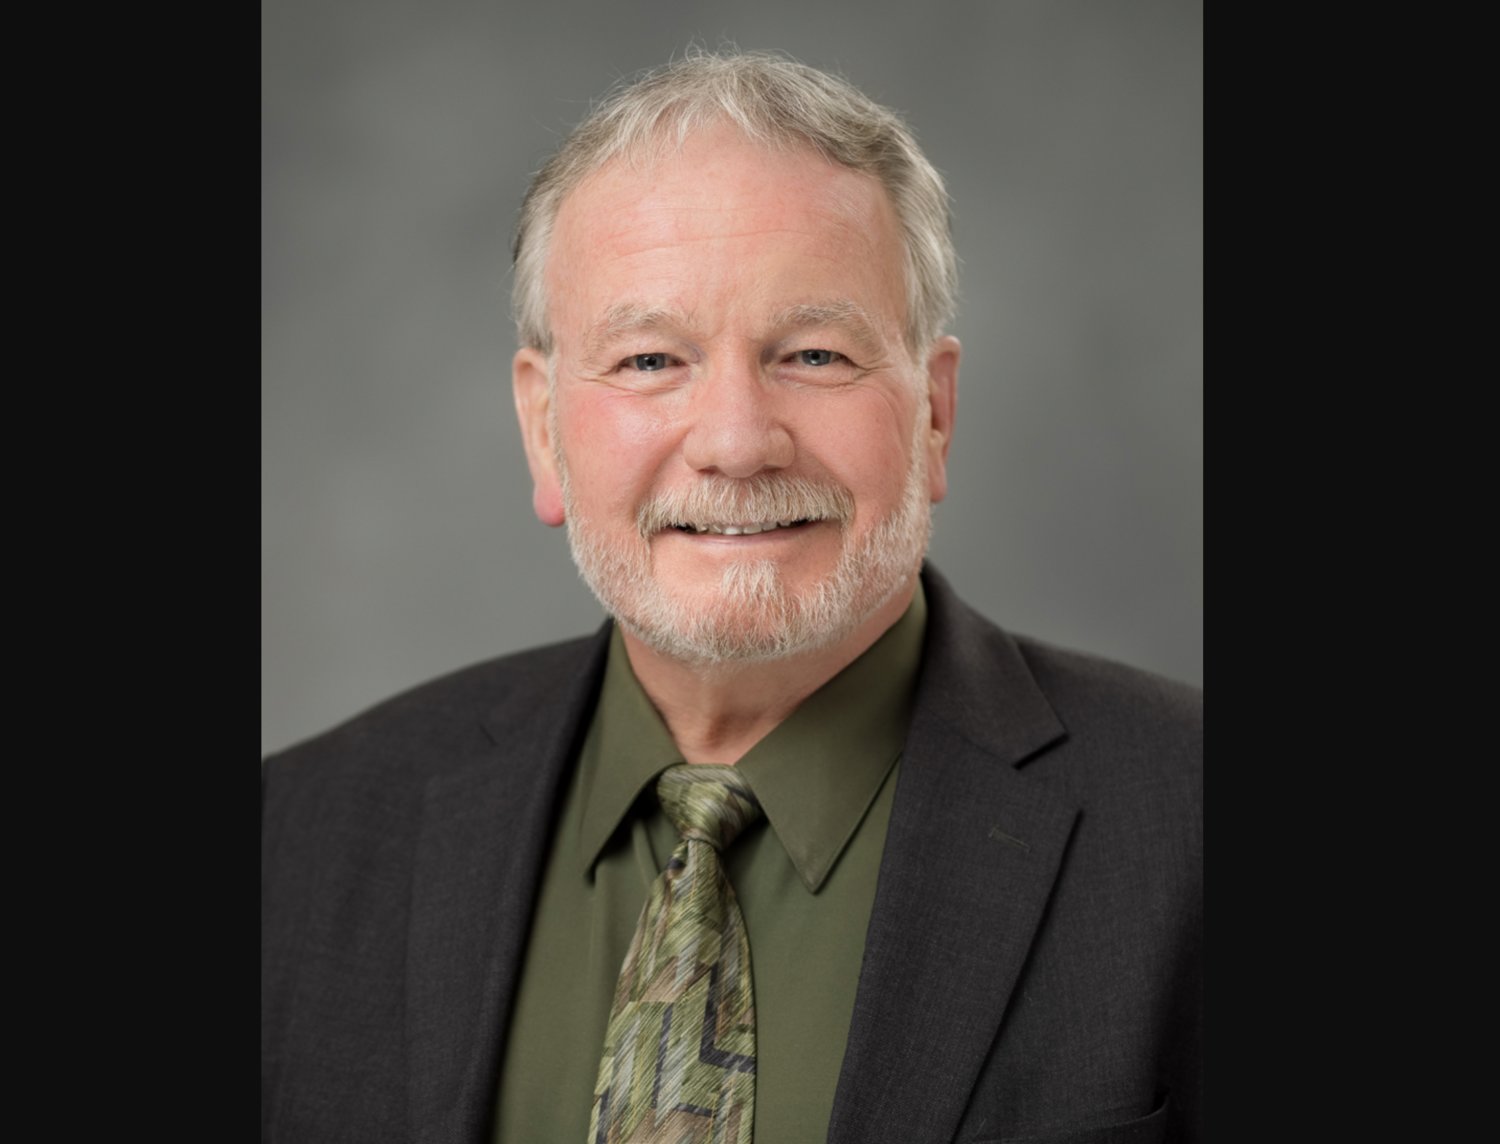 Sen. Jim McCune, R-Graham, represents the 2nd Legislative District, which includes southern Pierce County and part of Thurston County, including Yelm and Lacey.